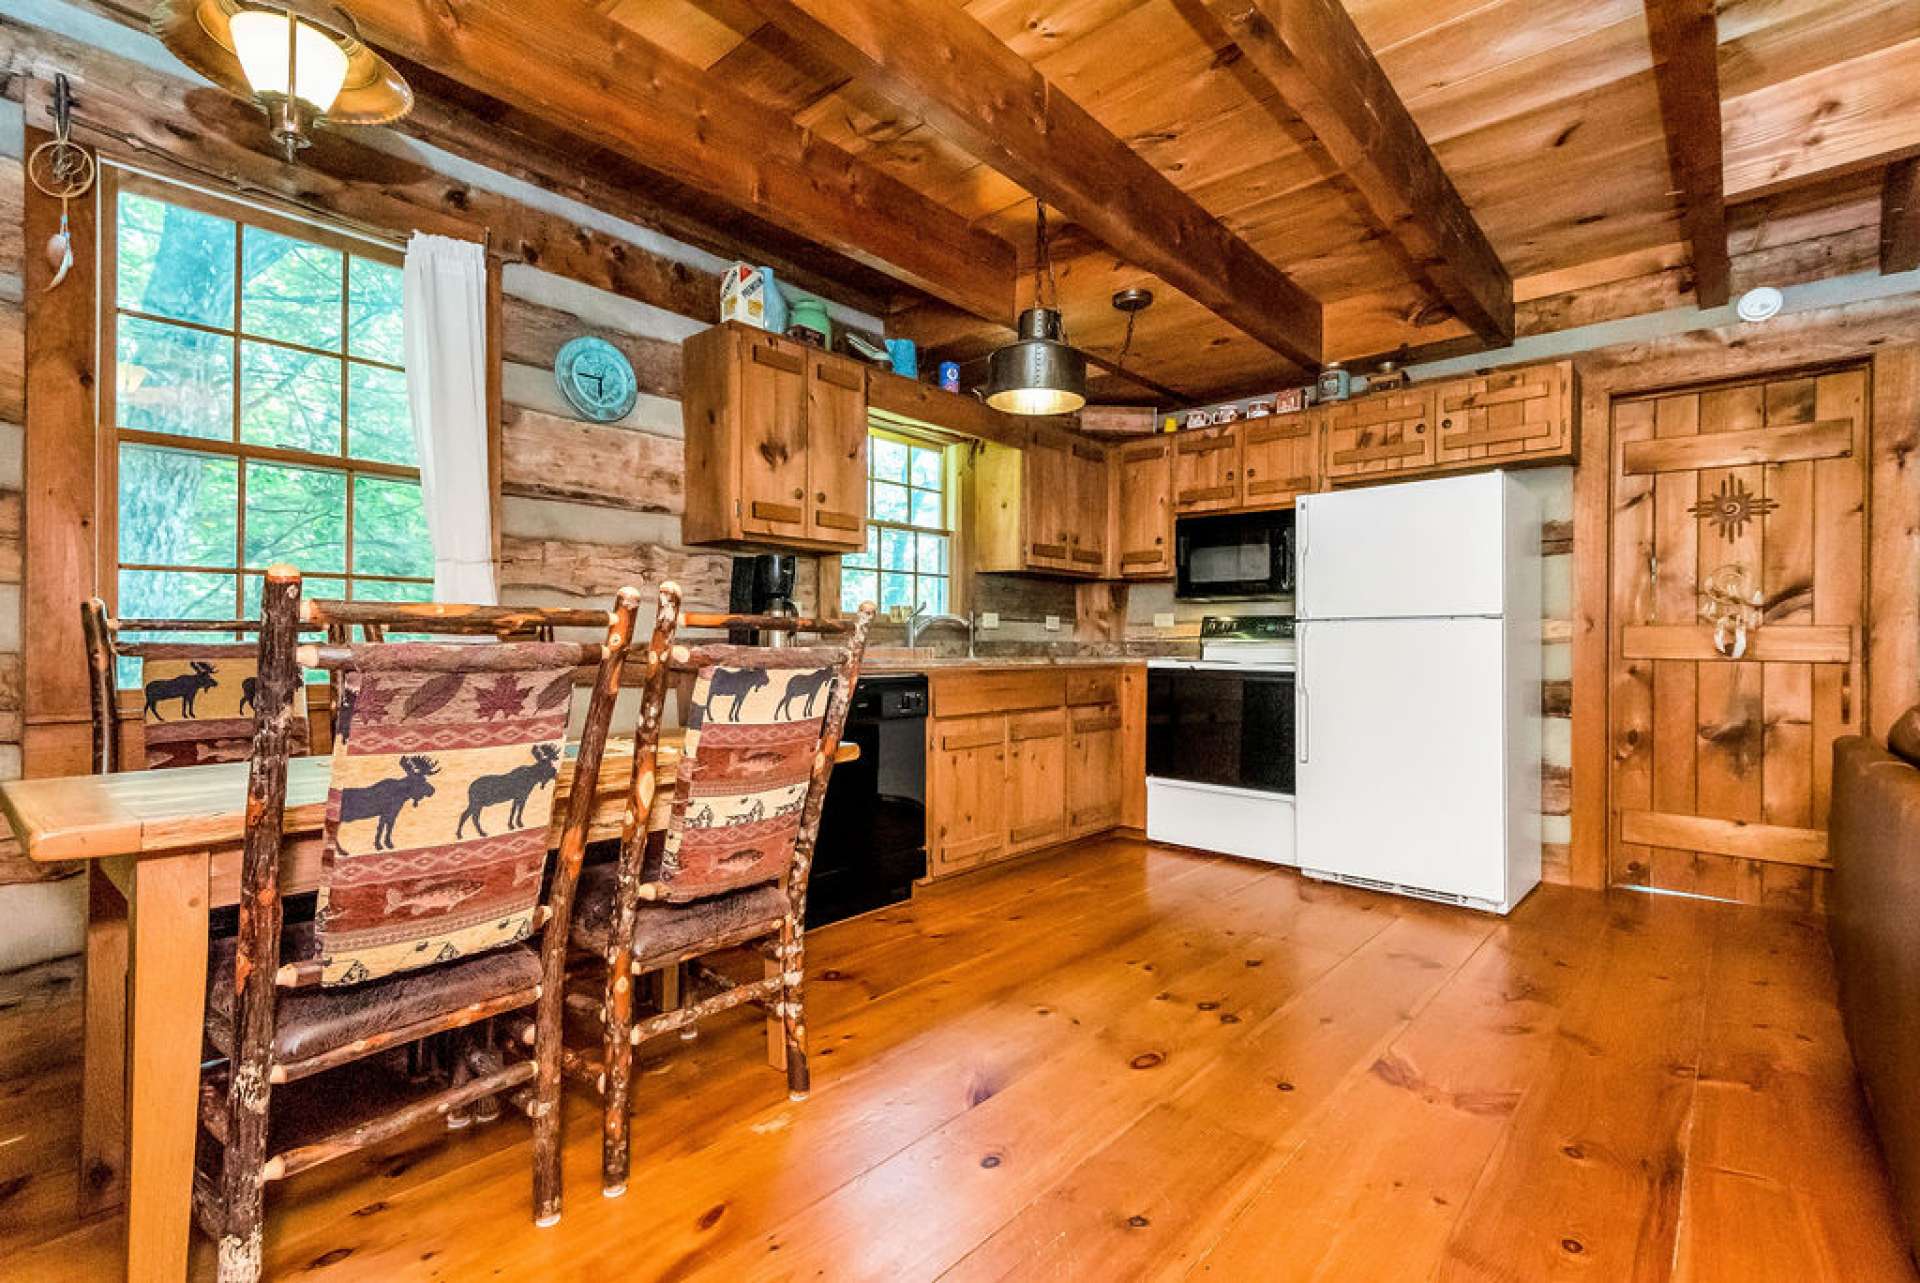 Embrace the rustic cabin charm in your mountain get away!